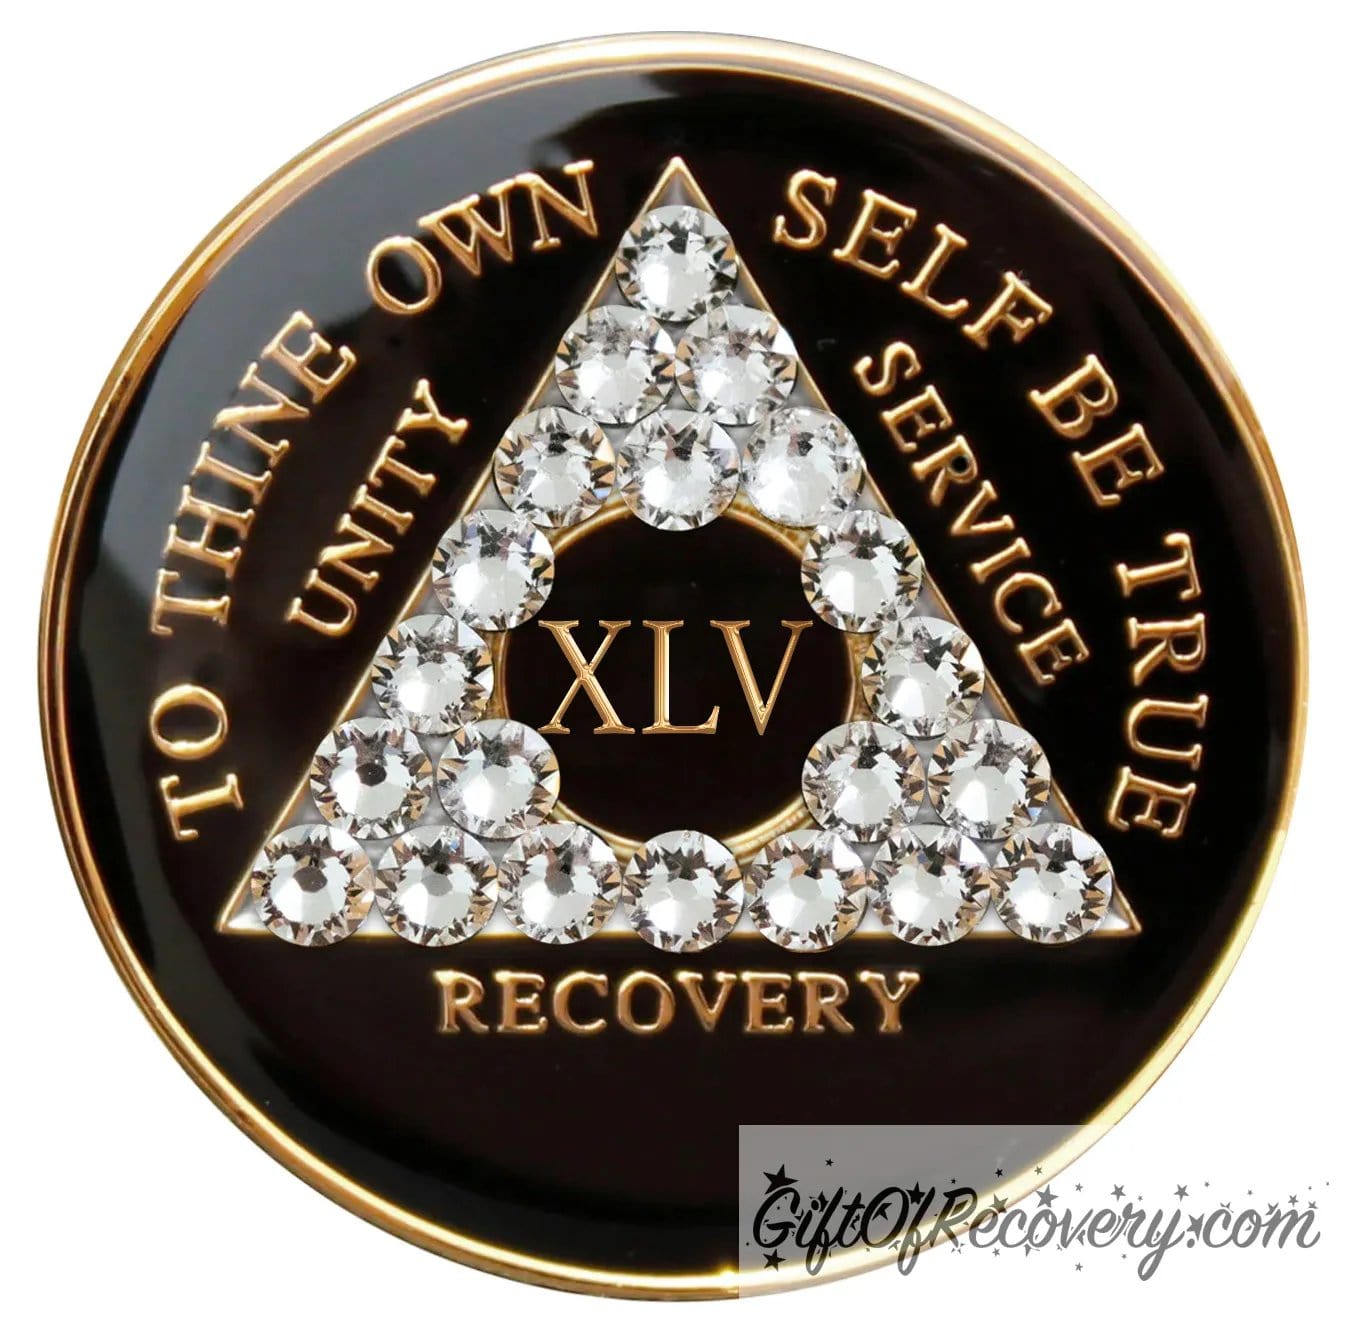 45 year AA medallion black onyx with 21 clear genuine crystals in the shape of the triangle, to thine own self be true, unity, service, recovery, and the roman numeral are embossed with 14k gold-plated brass, the recovery medallion is sealed with resin for a glossy finish that will last and is scratch proof.